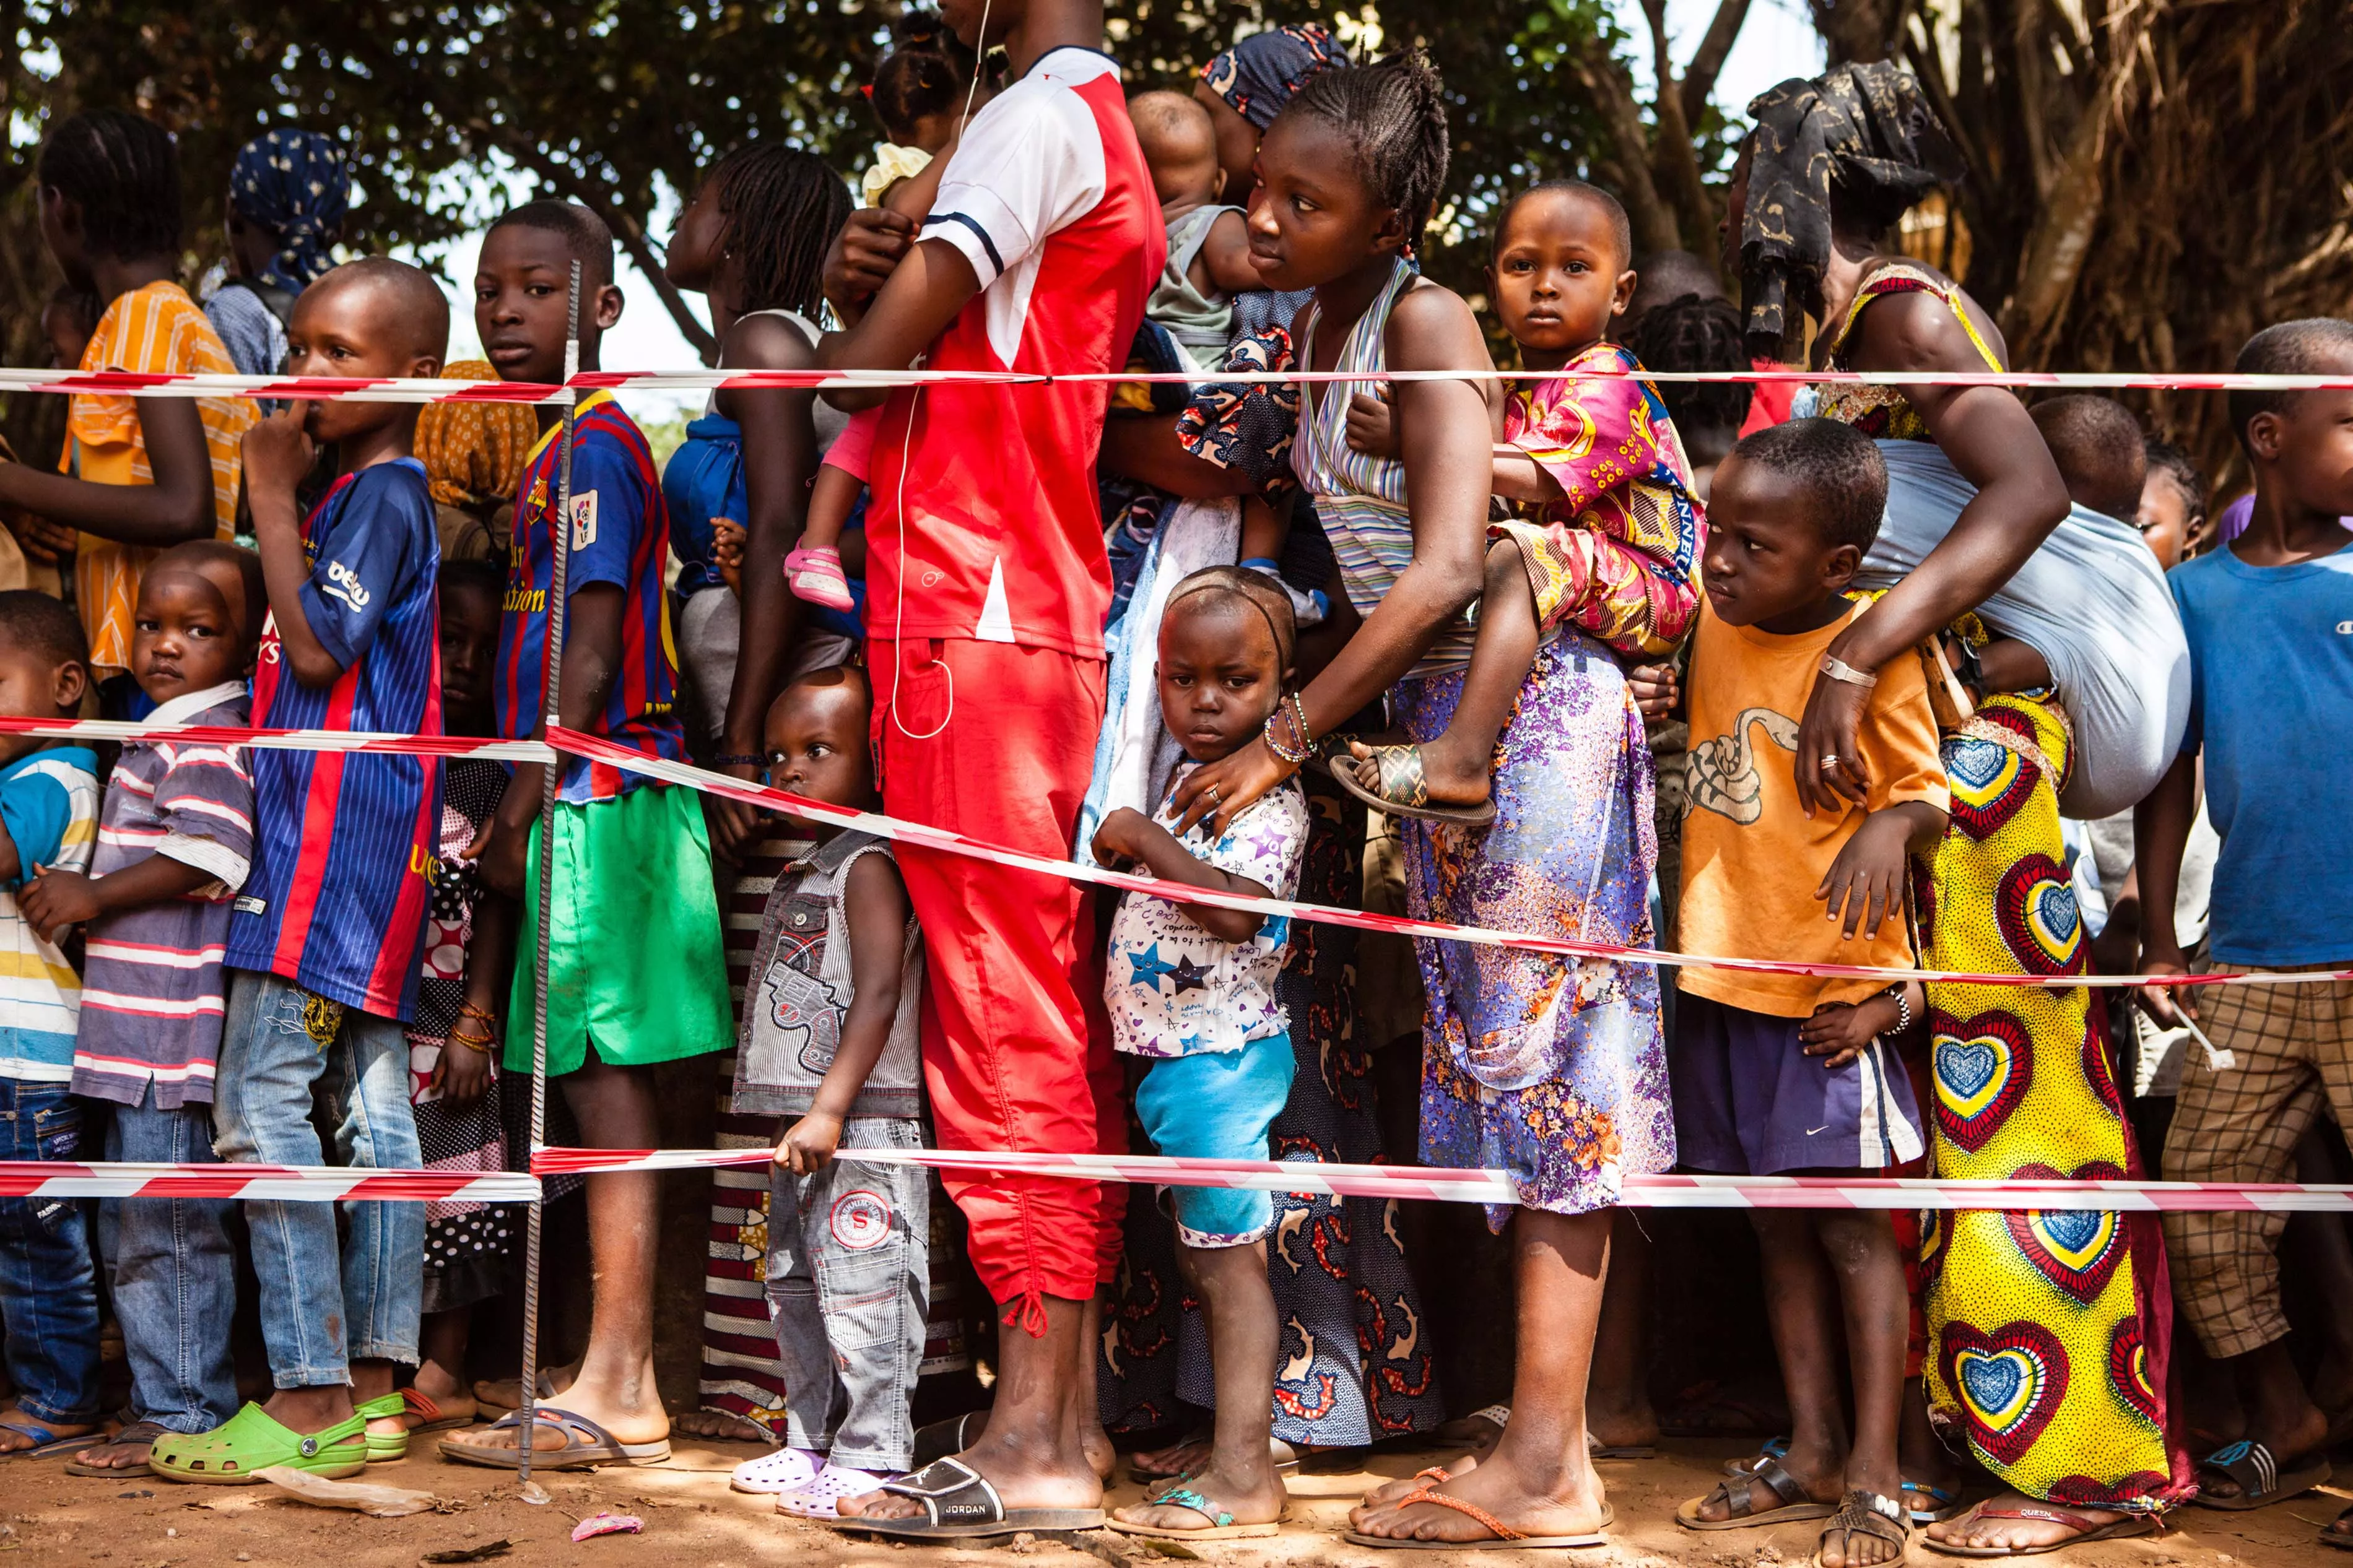 Children queue at a vaccination point in the commune of Matoto, Conakry, Guinea. Médecins Sans Frontières/Doctors without Borders (MSF) is launching a large scale measles vaccination campaign in Conakry, the capital of Guina. Since the beginning of the year there have been 3468 confirmed cases and 14 deaths dues to measles in Guinea. Conakry and Nzérékoré are the most affected districts. Photograph by Markel Redondo